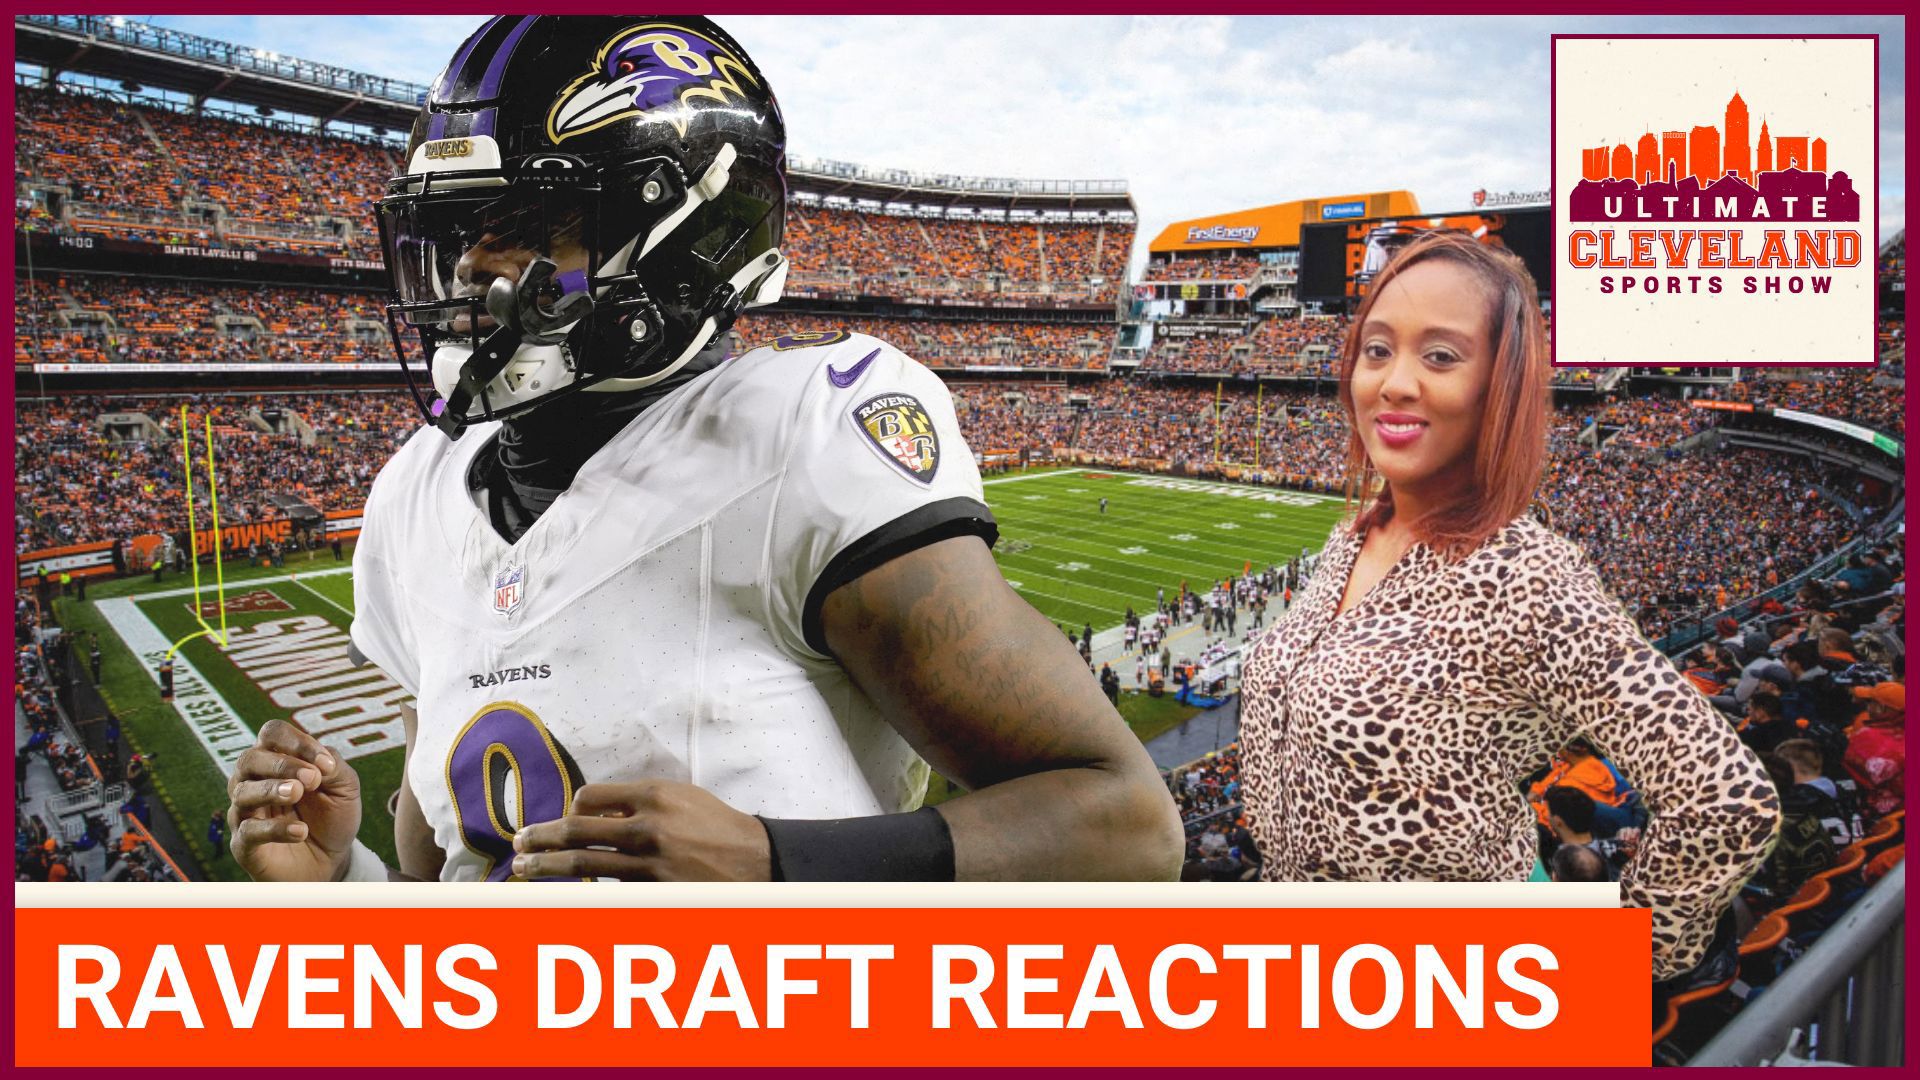 How did the Baltimore Ravens do in this years NFL draft and how will affect the rivalry with the Cleveland Browns?